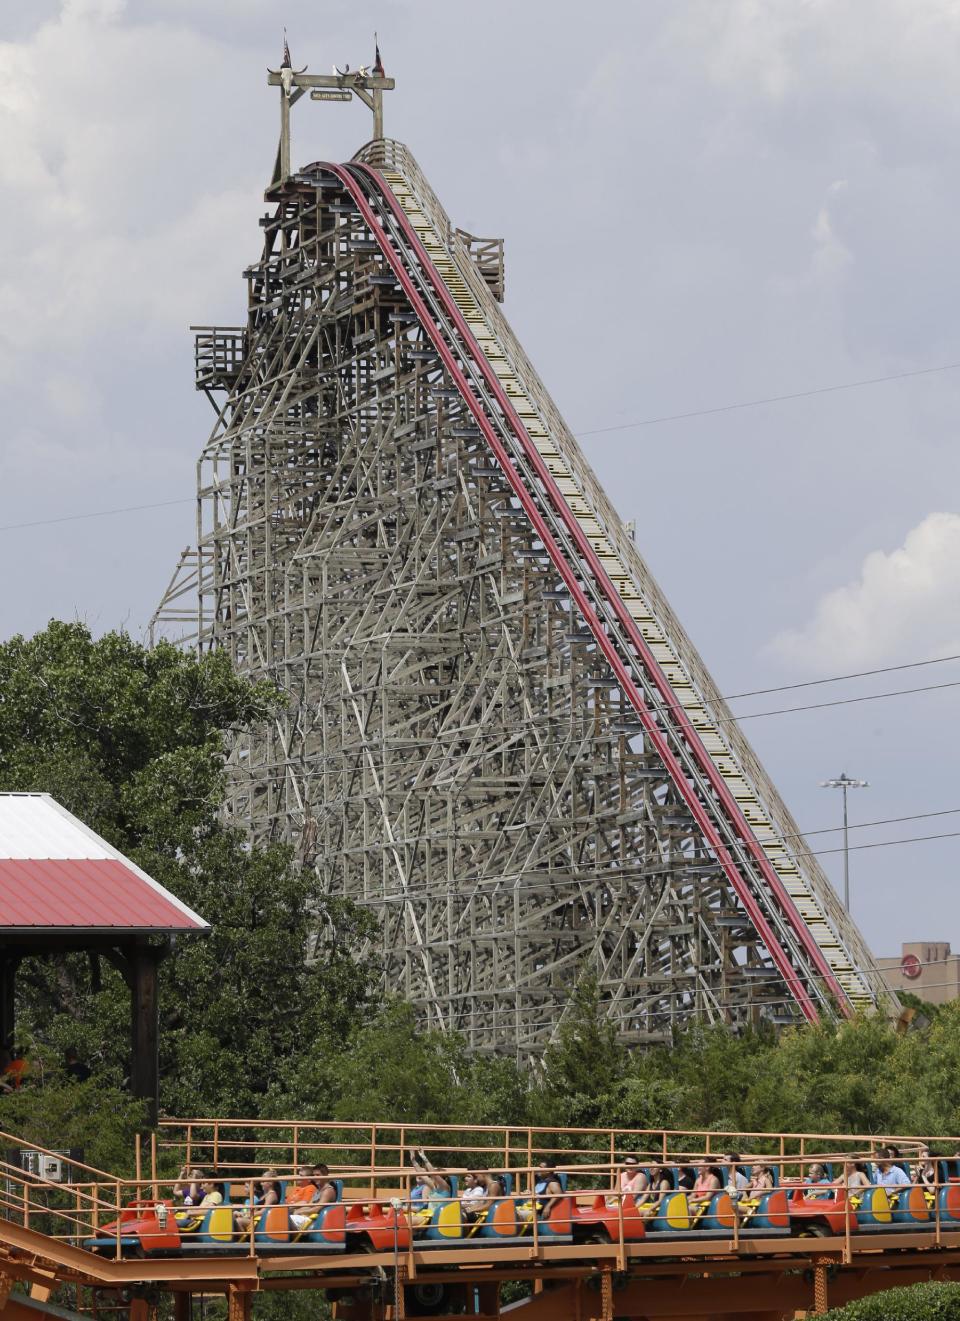 The Texas Giant roller coaster ride sits idle in the background as people take in another roller coaster ride at the Six Flags Over Texas park Saturday, July 20, 2013, in Arlington, Texas. Investigators will try to determine if a woman who died while riding the roller coaster at the amusement park Friday night fell from the ride after some witnesses said she wasn't properly secured.(AP Photo/LM Otero )